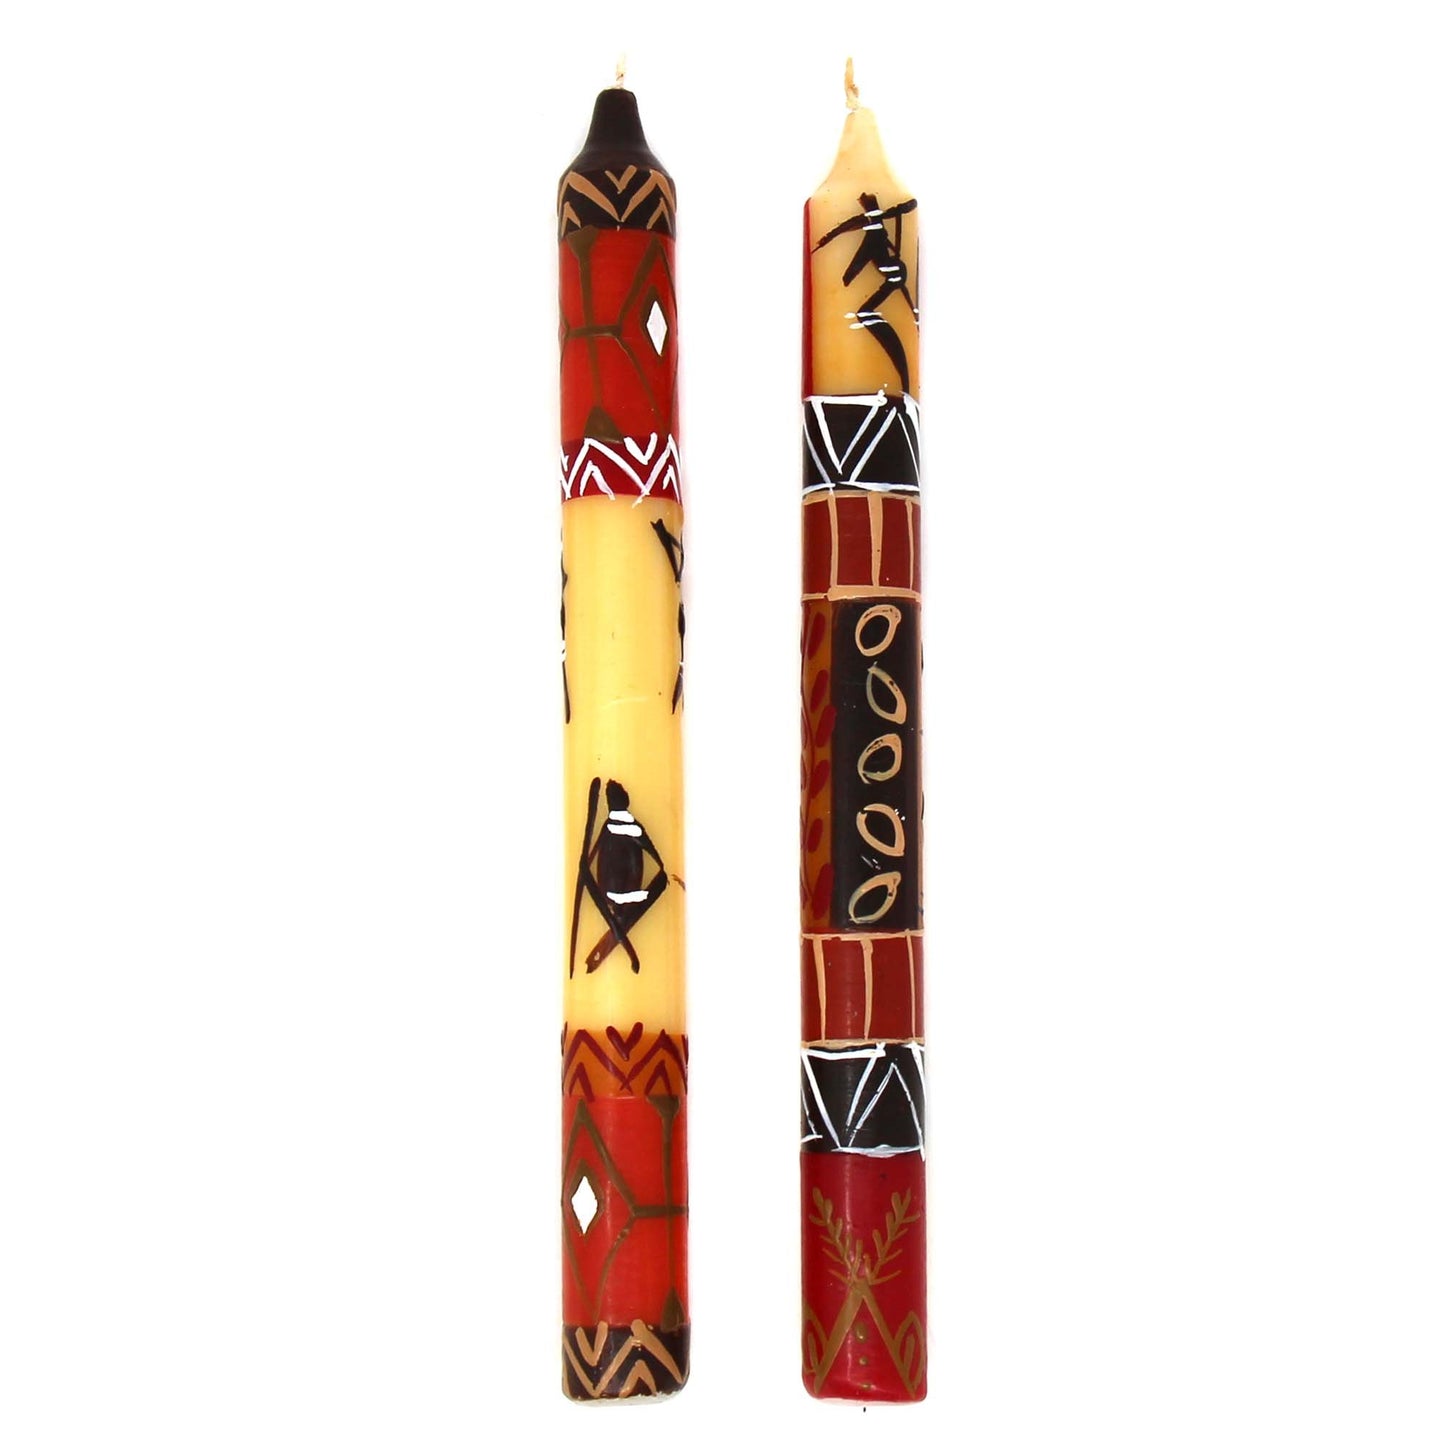 Tall Hand Painted Candles - Pair - Damisi Design - Nobunto